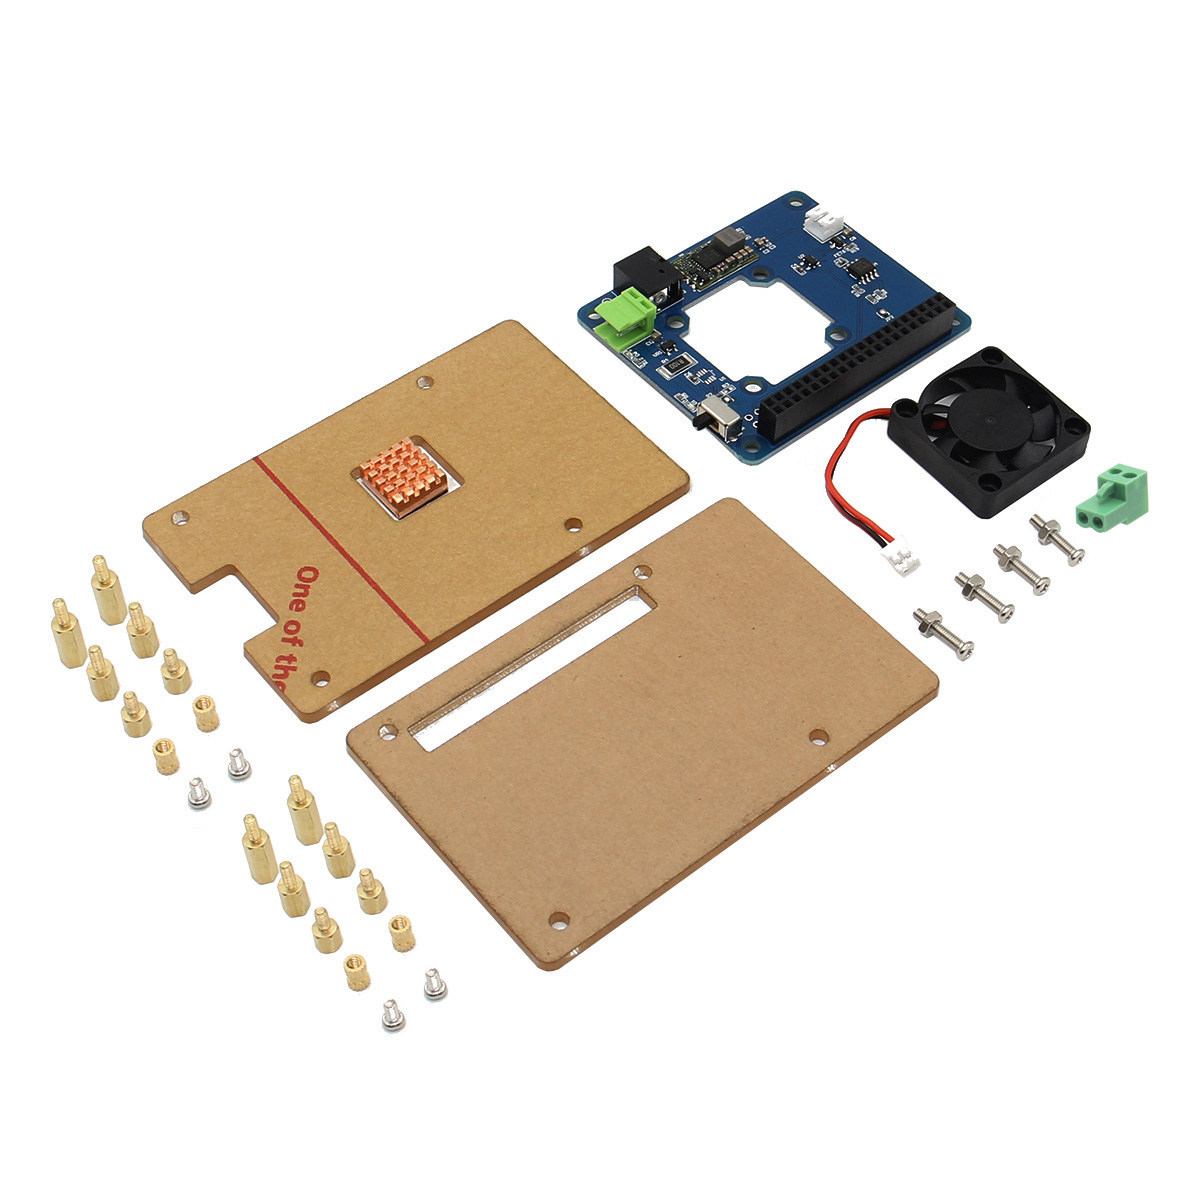 Geekworm-Temperature-Control-Fan-And-Power-Expansion-Board--Acrylic-Case--Copper-Heat-Sink-Kit-1150152